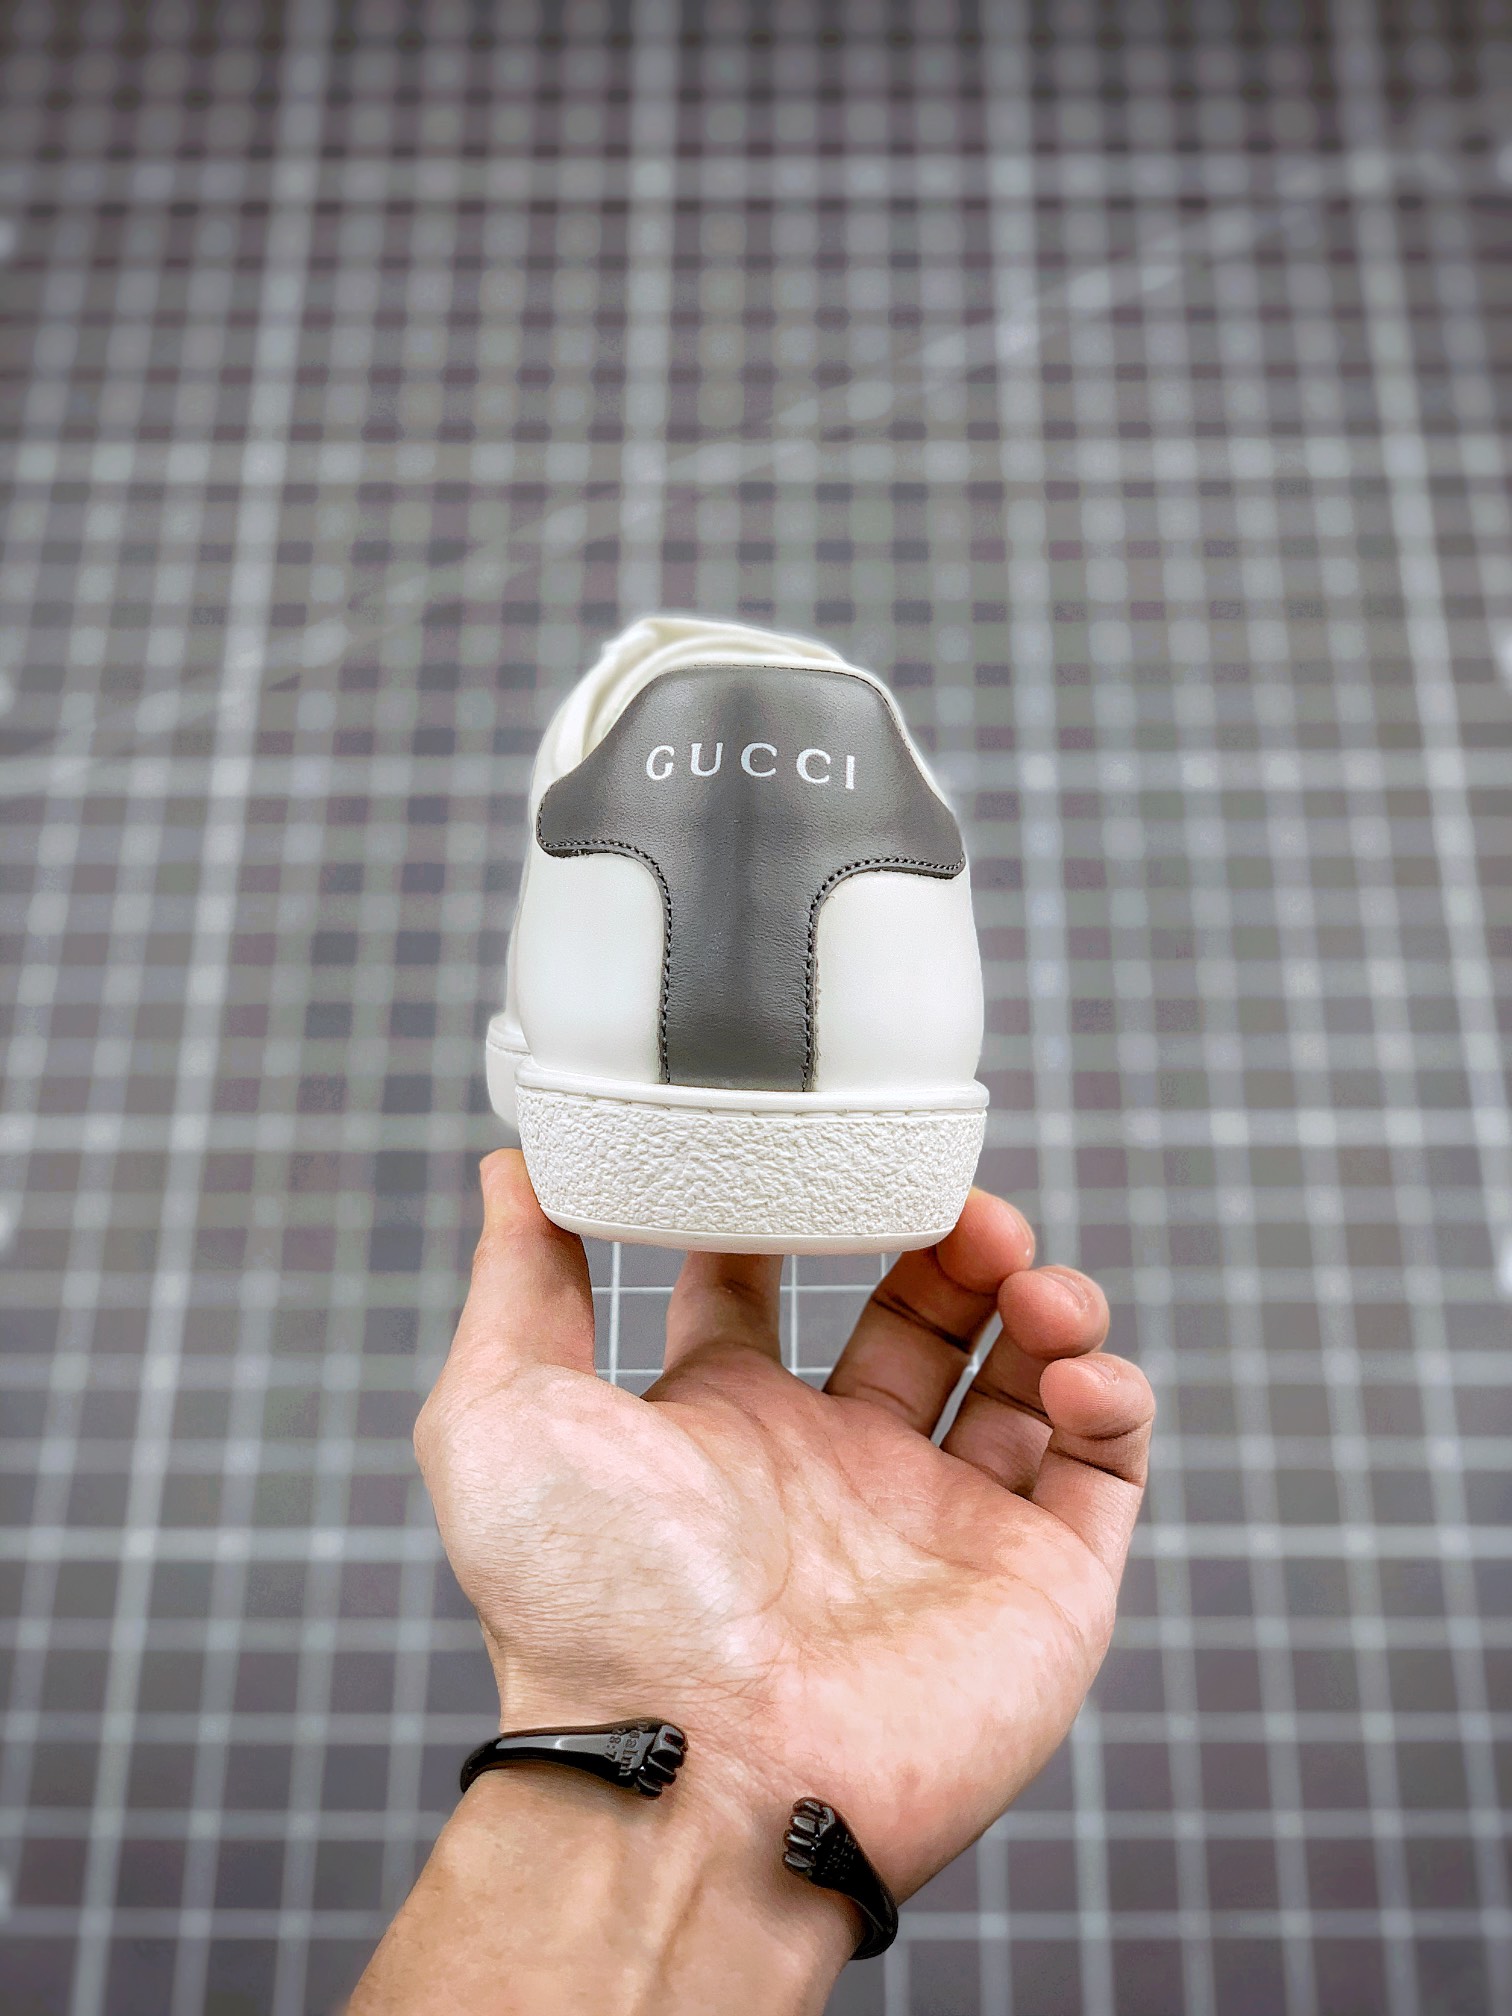 The most powerful top-level pure original purchase version chip on the market can scan Gucci Ace series